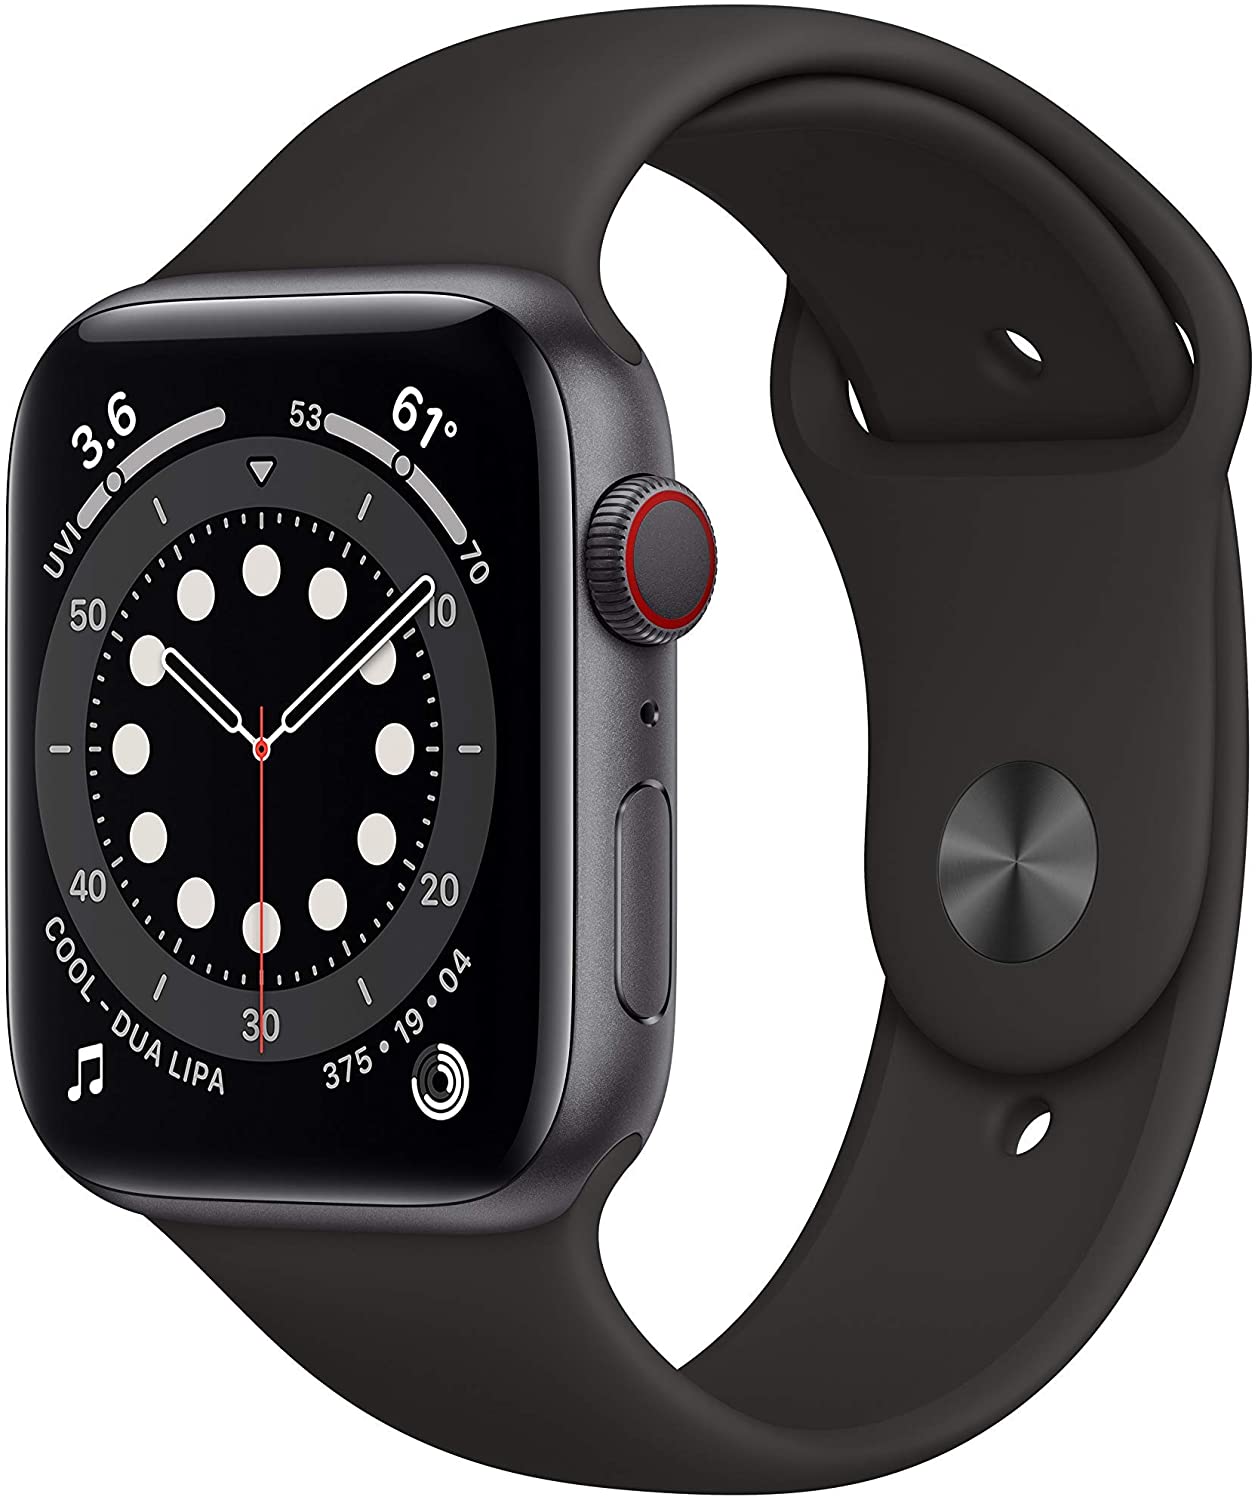 Apple Watch Series 6 44MM GPS (Choose Color) - $359.99 at Sam's Club